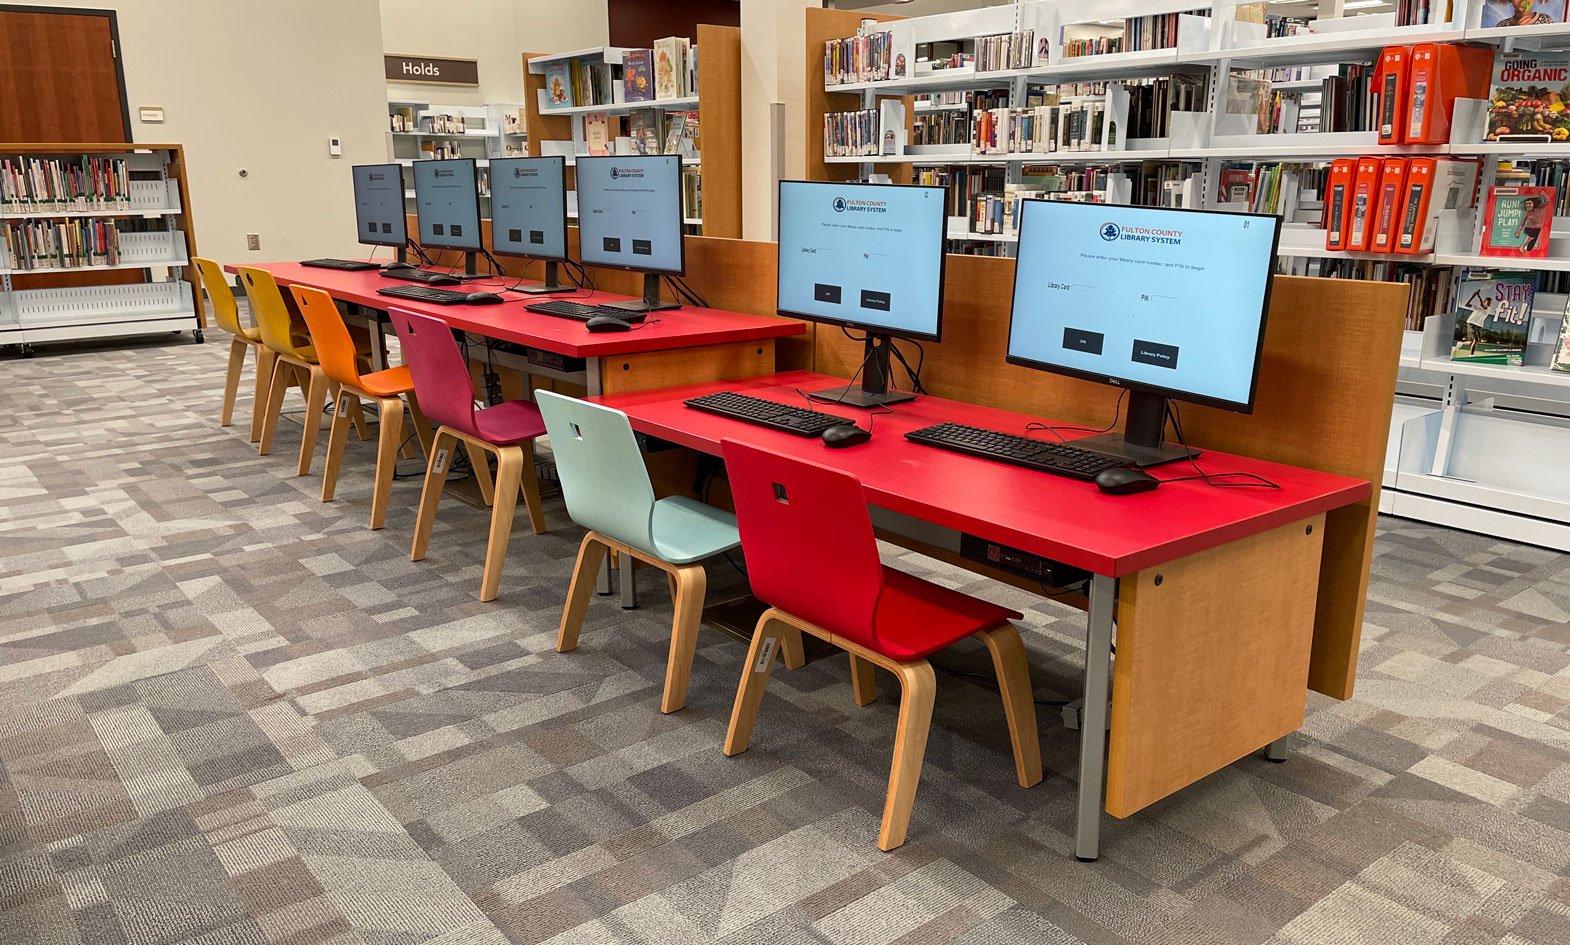 Children's computer workstation, colorful library furniture